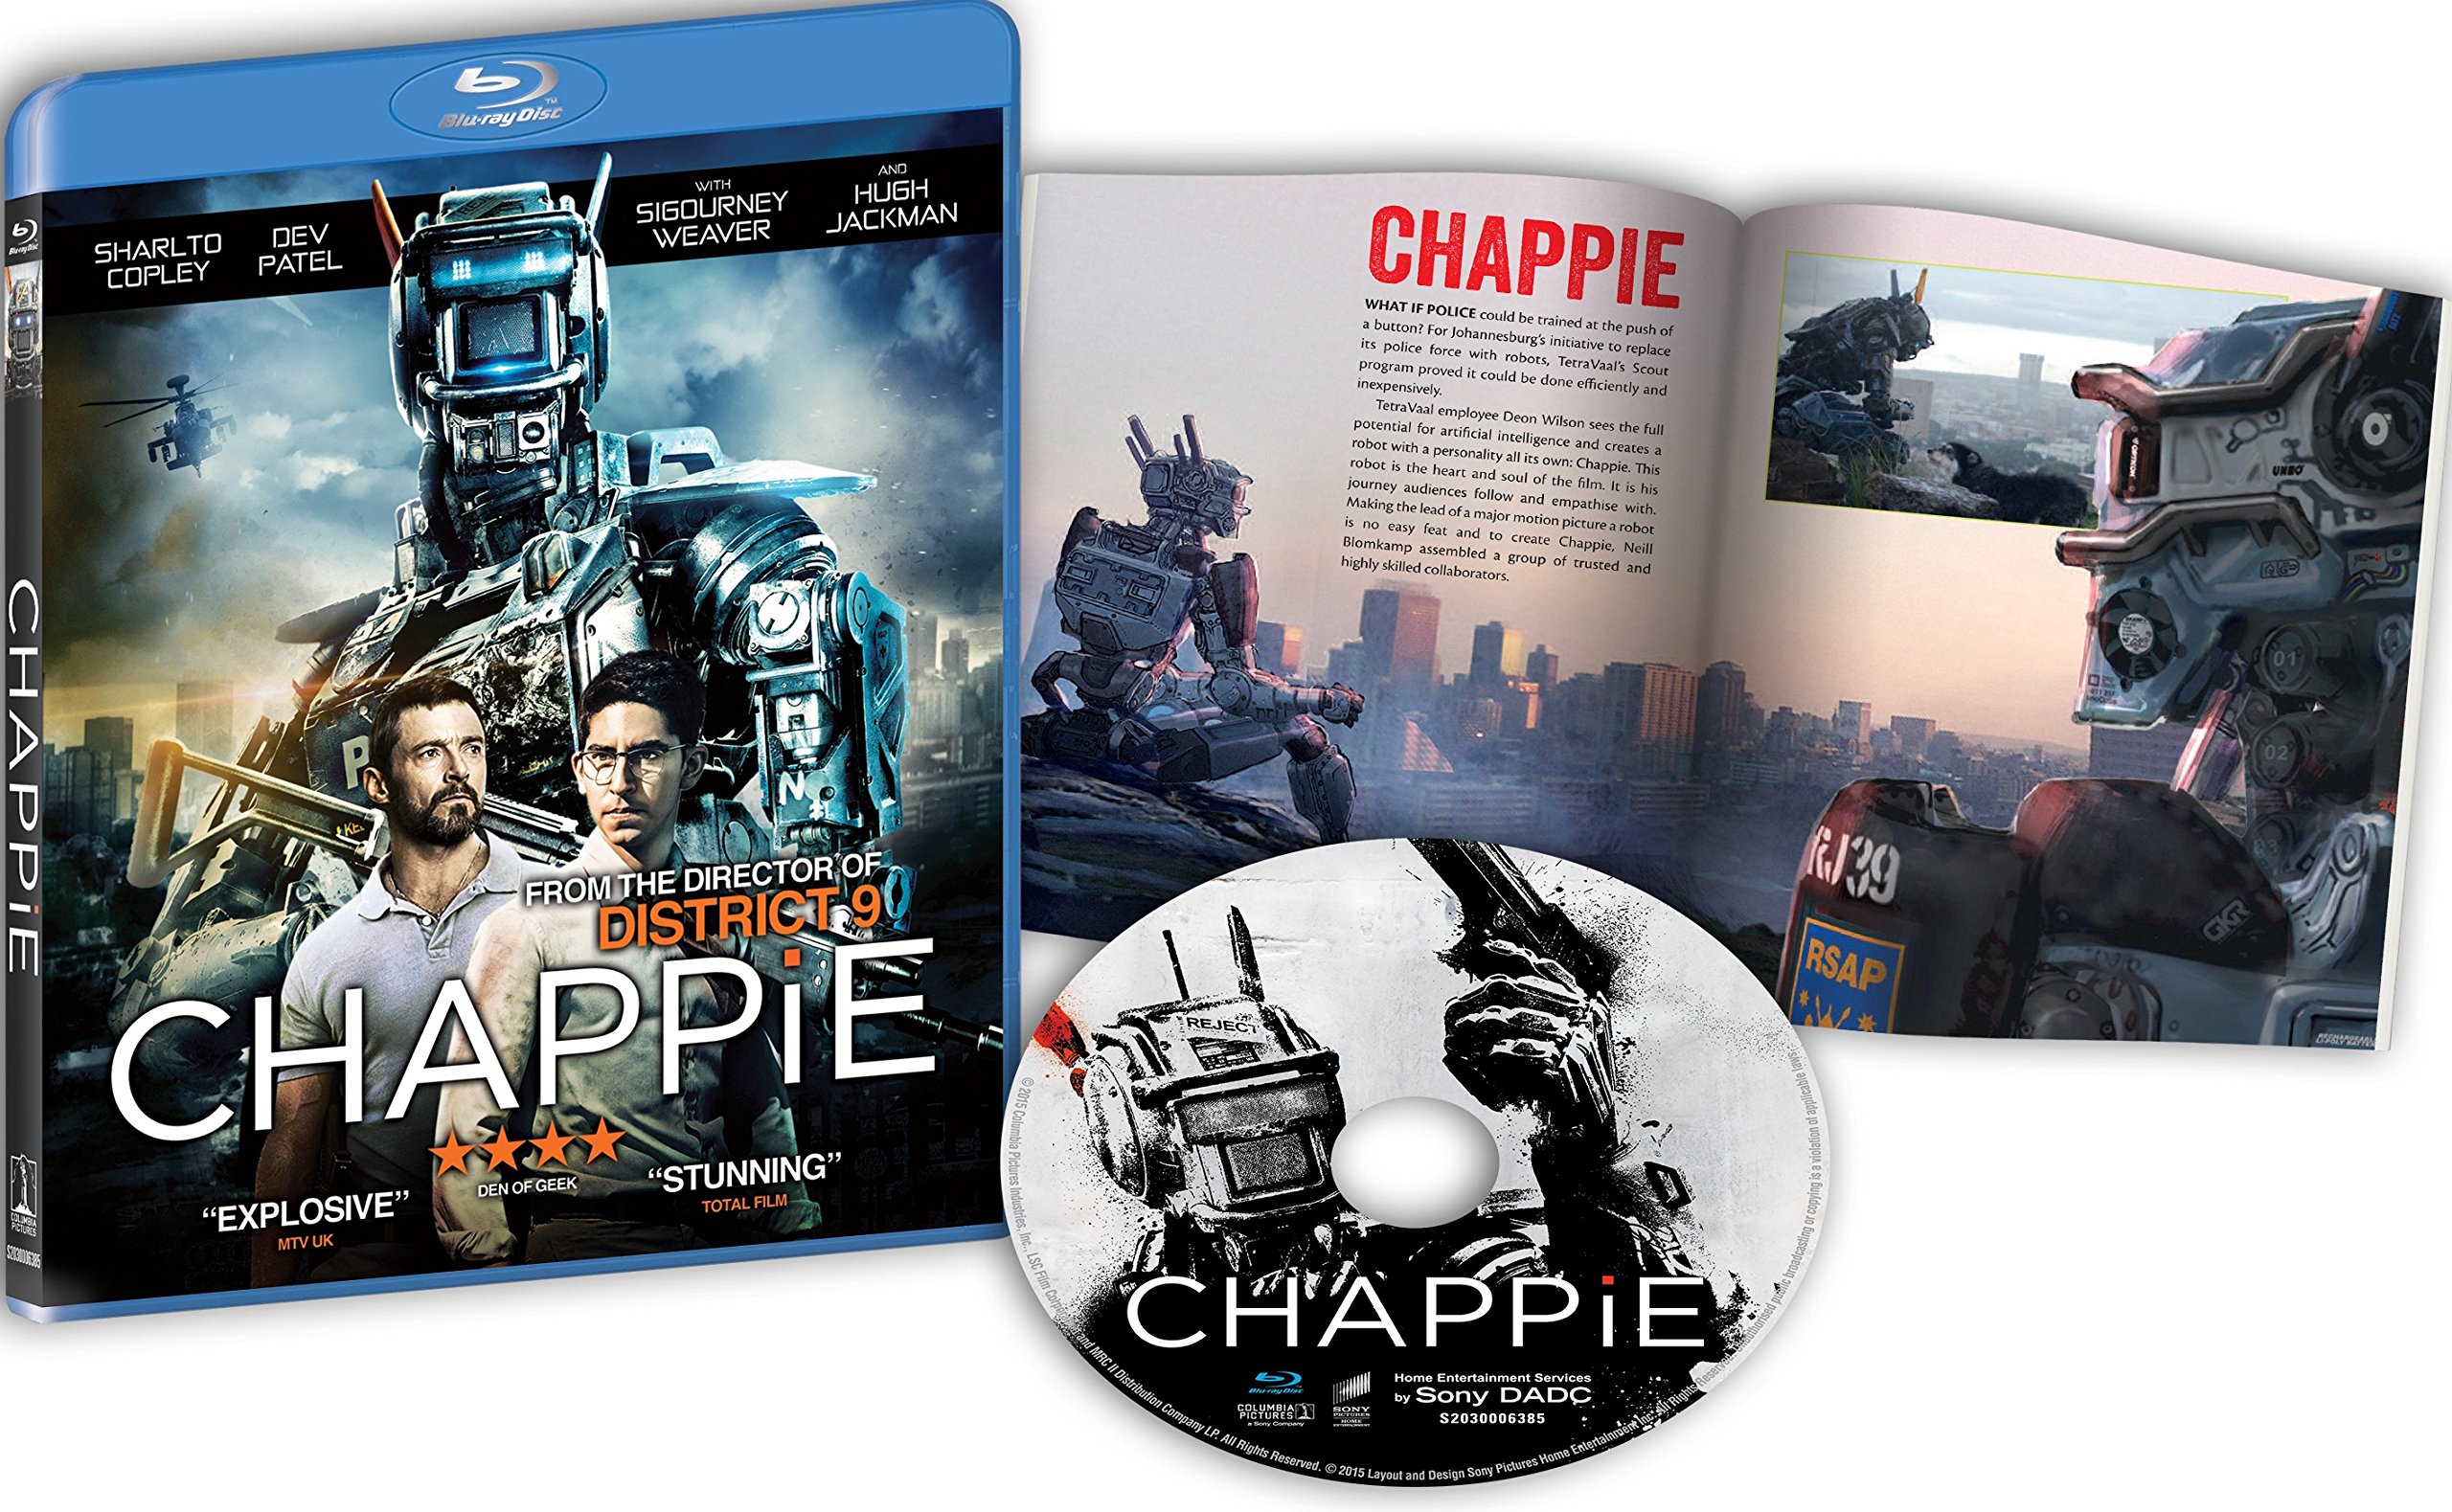 chappie-booklet-special-edition-movie-purchase-or-watch-online